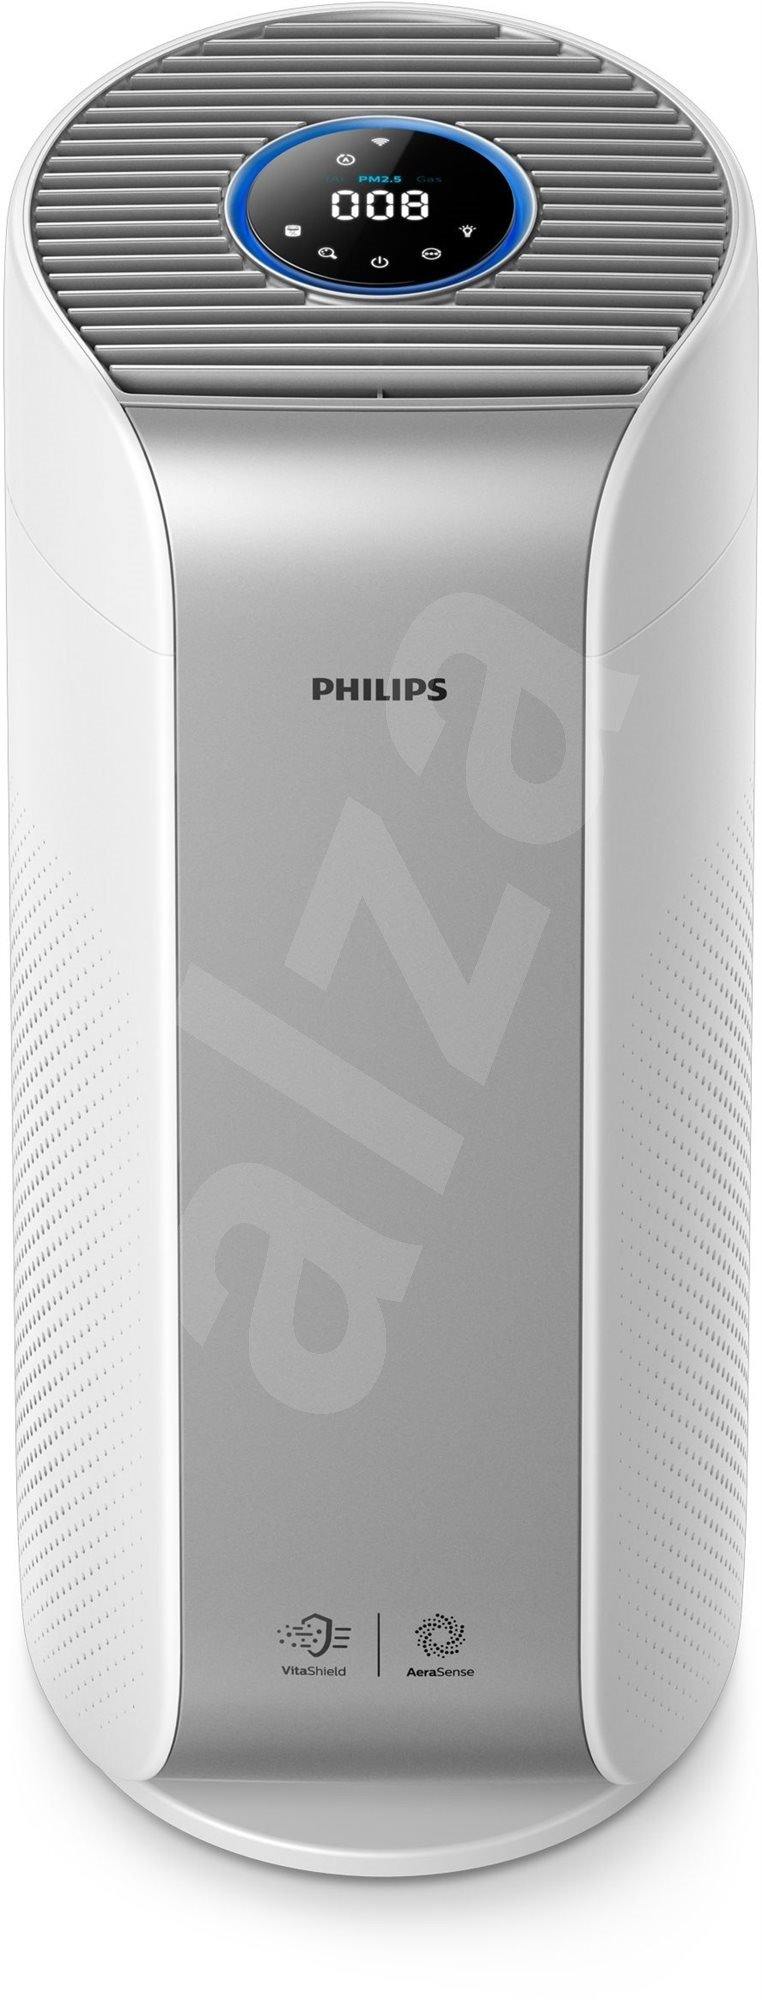 Philips Air Purifier - Series 2000 AC2958/63 With WiFi New Launch 2020 Covers Upto 200-409 Sq. Ft. - Mahajan Electronics Online